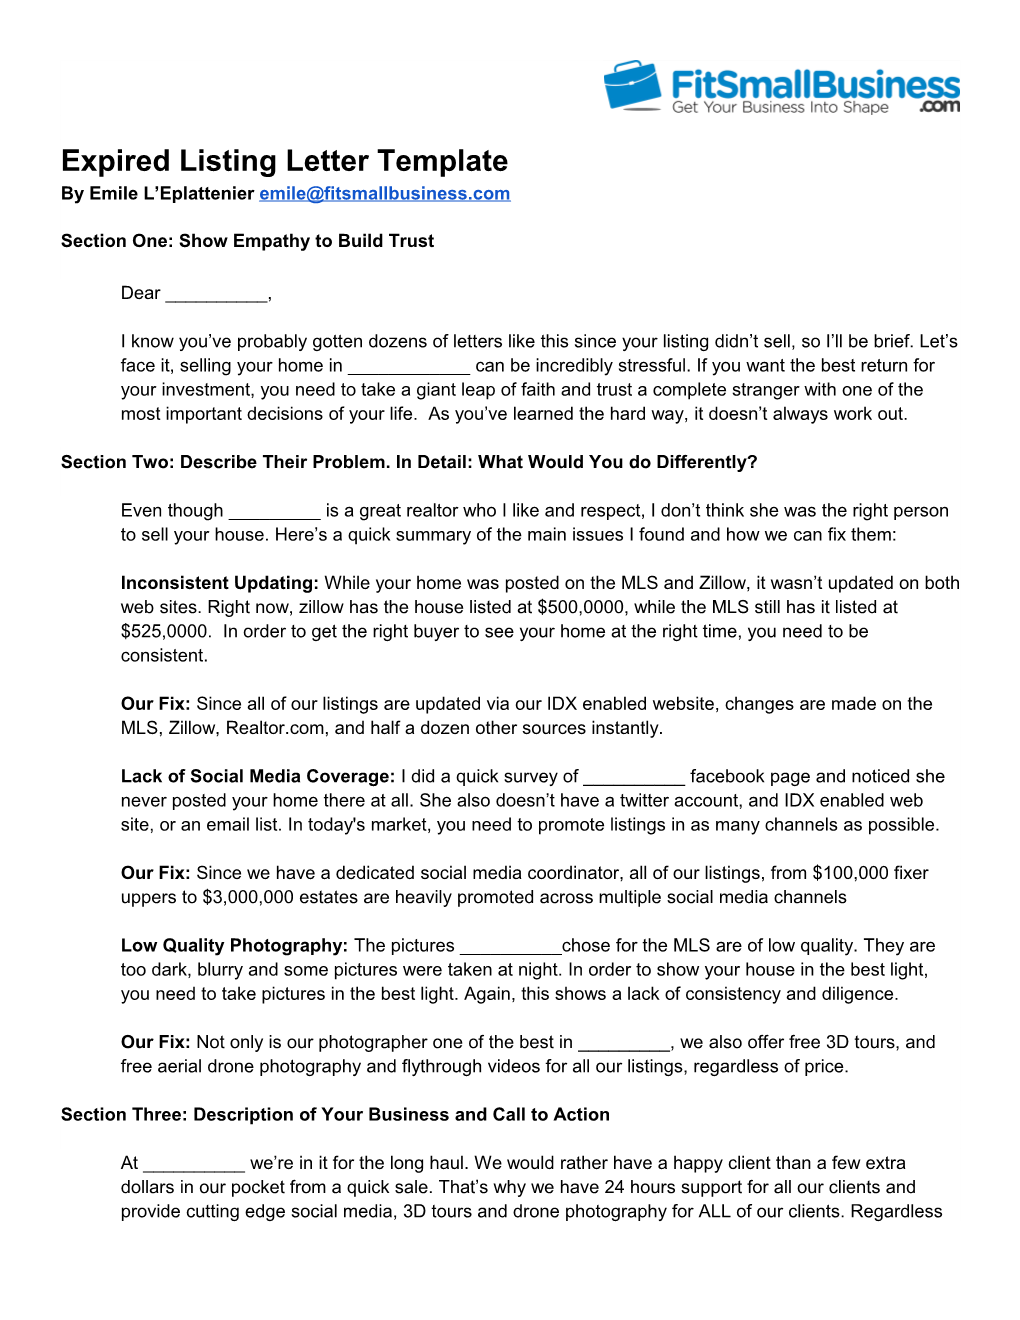 Expired Listing Letter Template